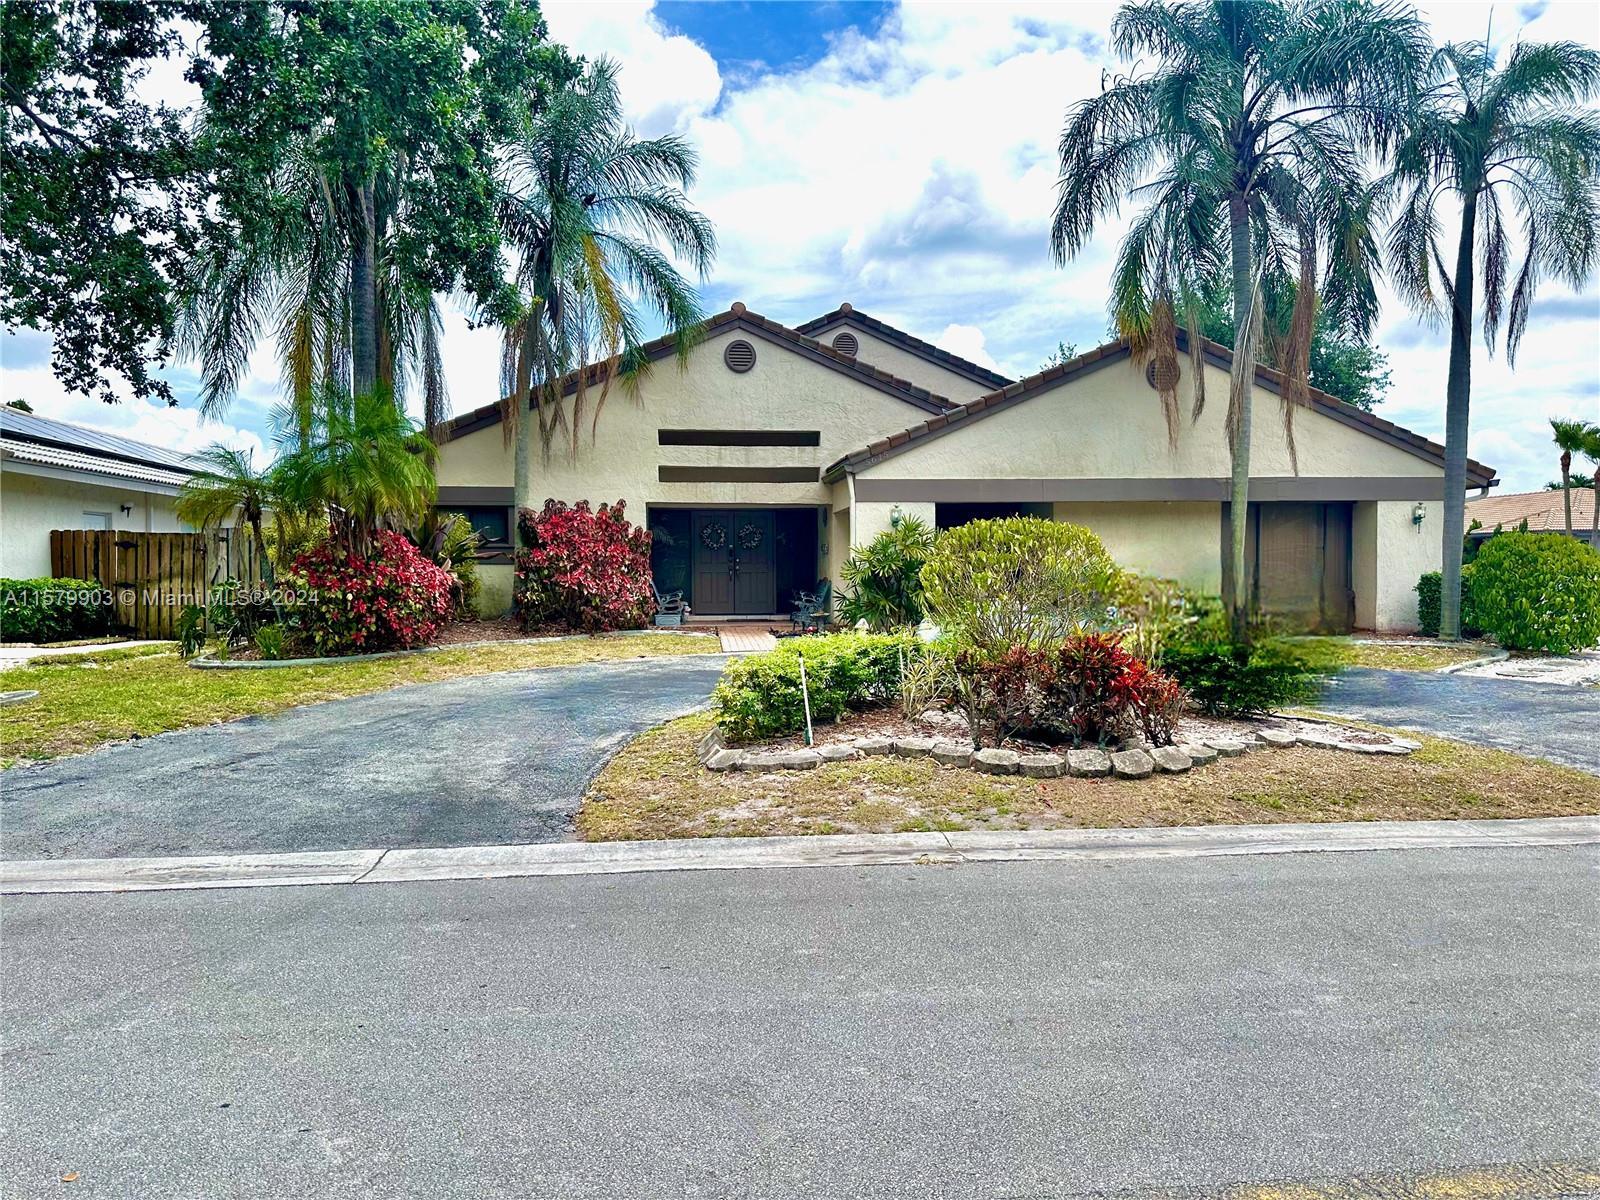 Photo of 5615 NW 64th Ln in Coral Springs, FL